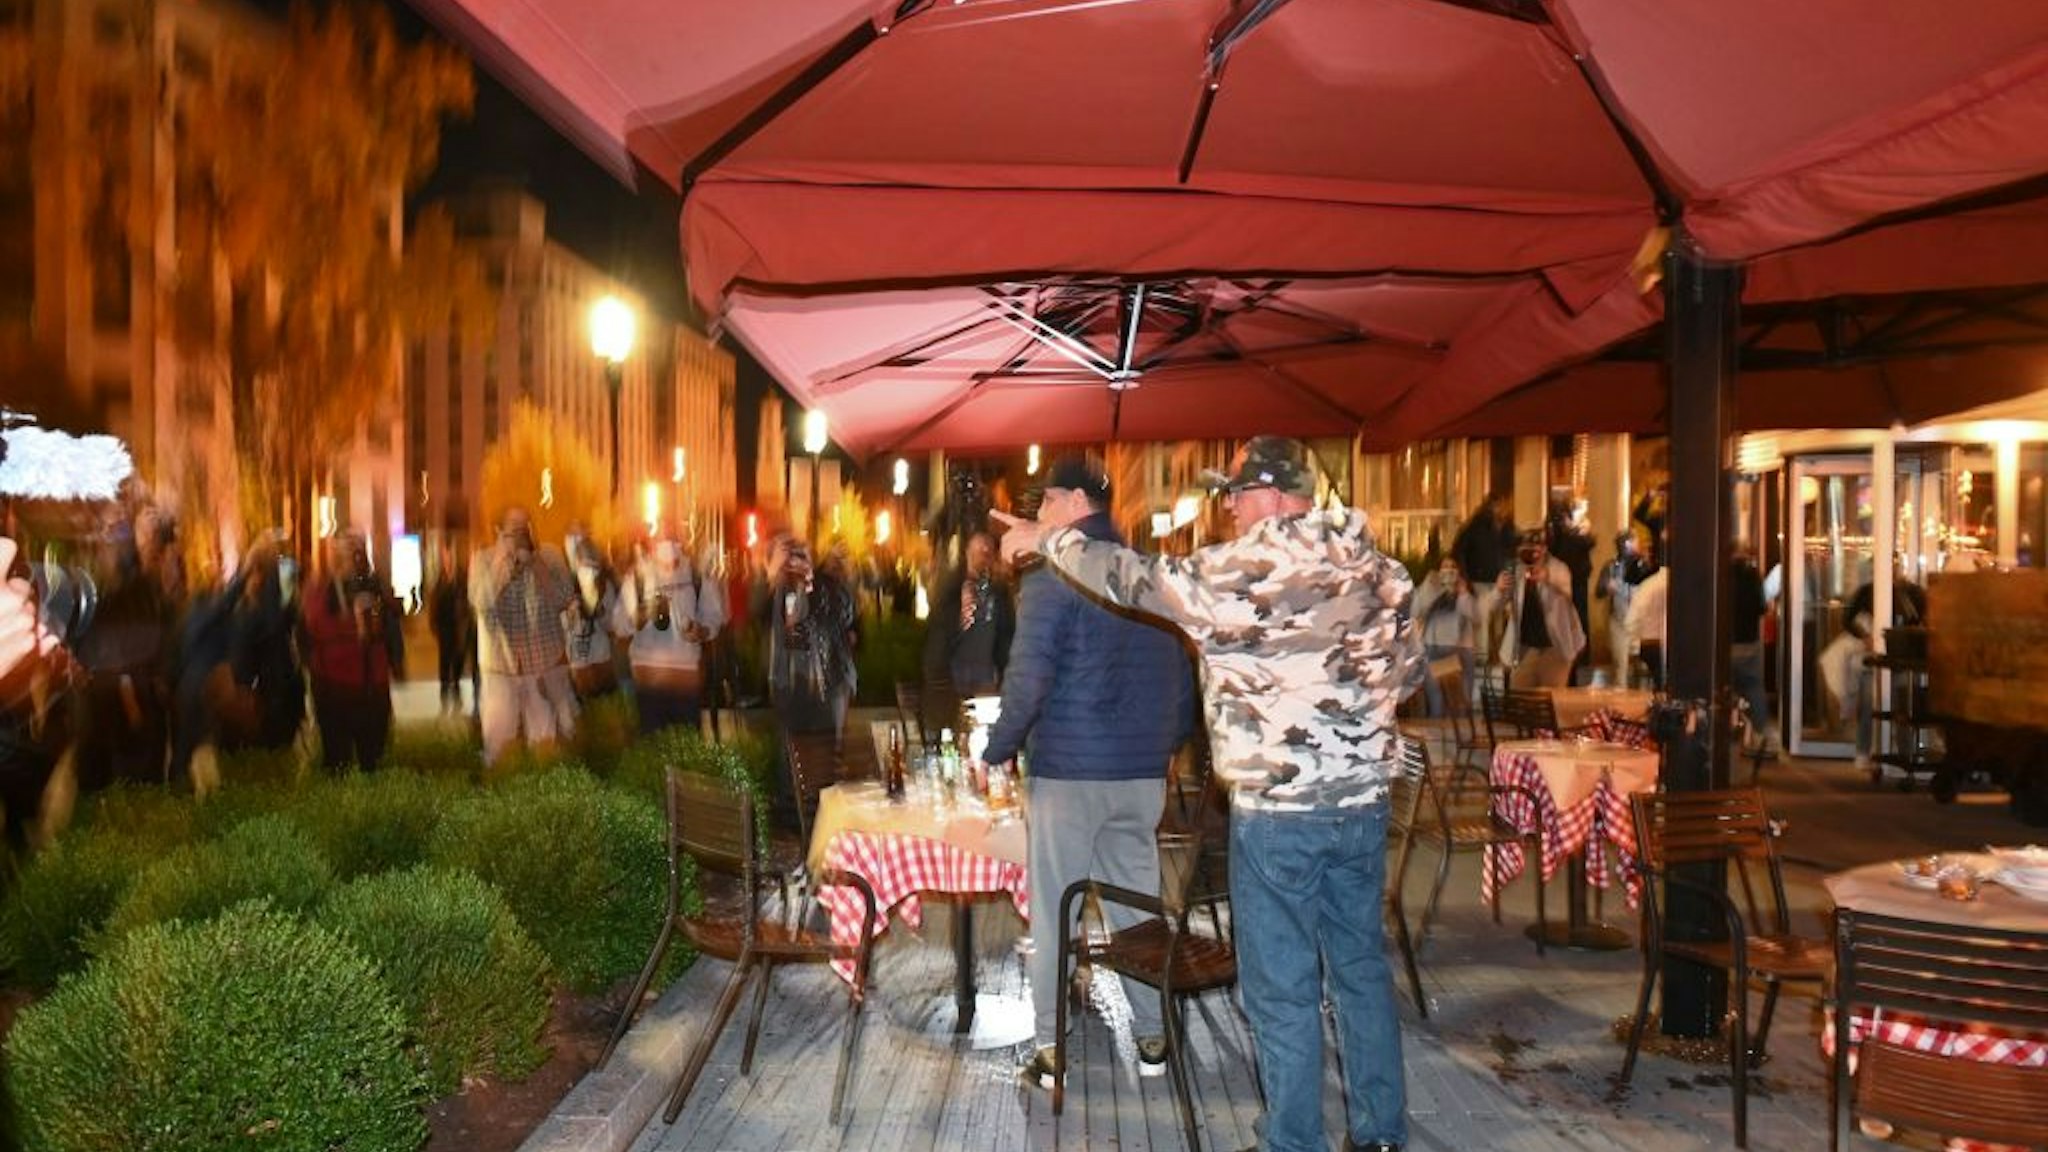 Trump supporters react as a crowd closes in on them at the terrace of a restaurant near Black Lives Matter Plaza in Washington, DC on November 14, 2020.